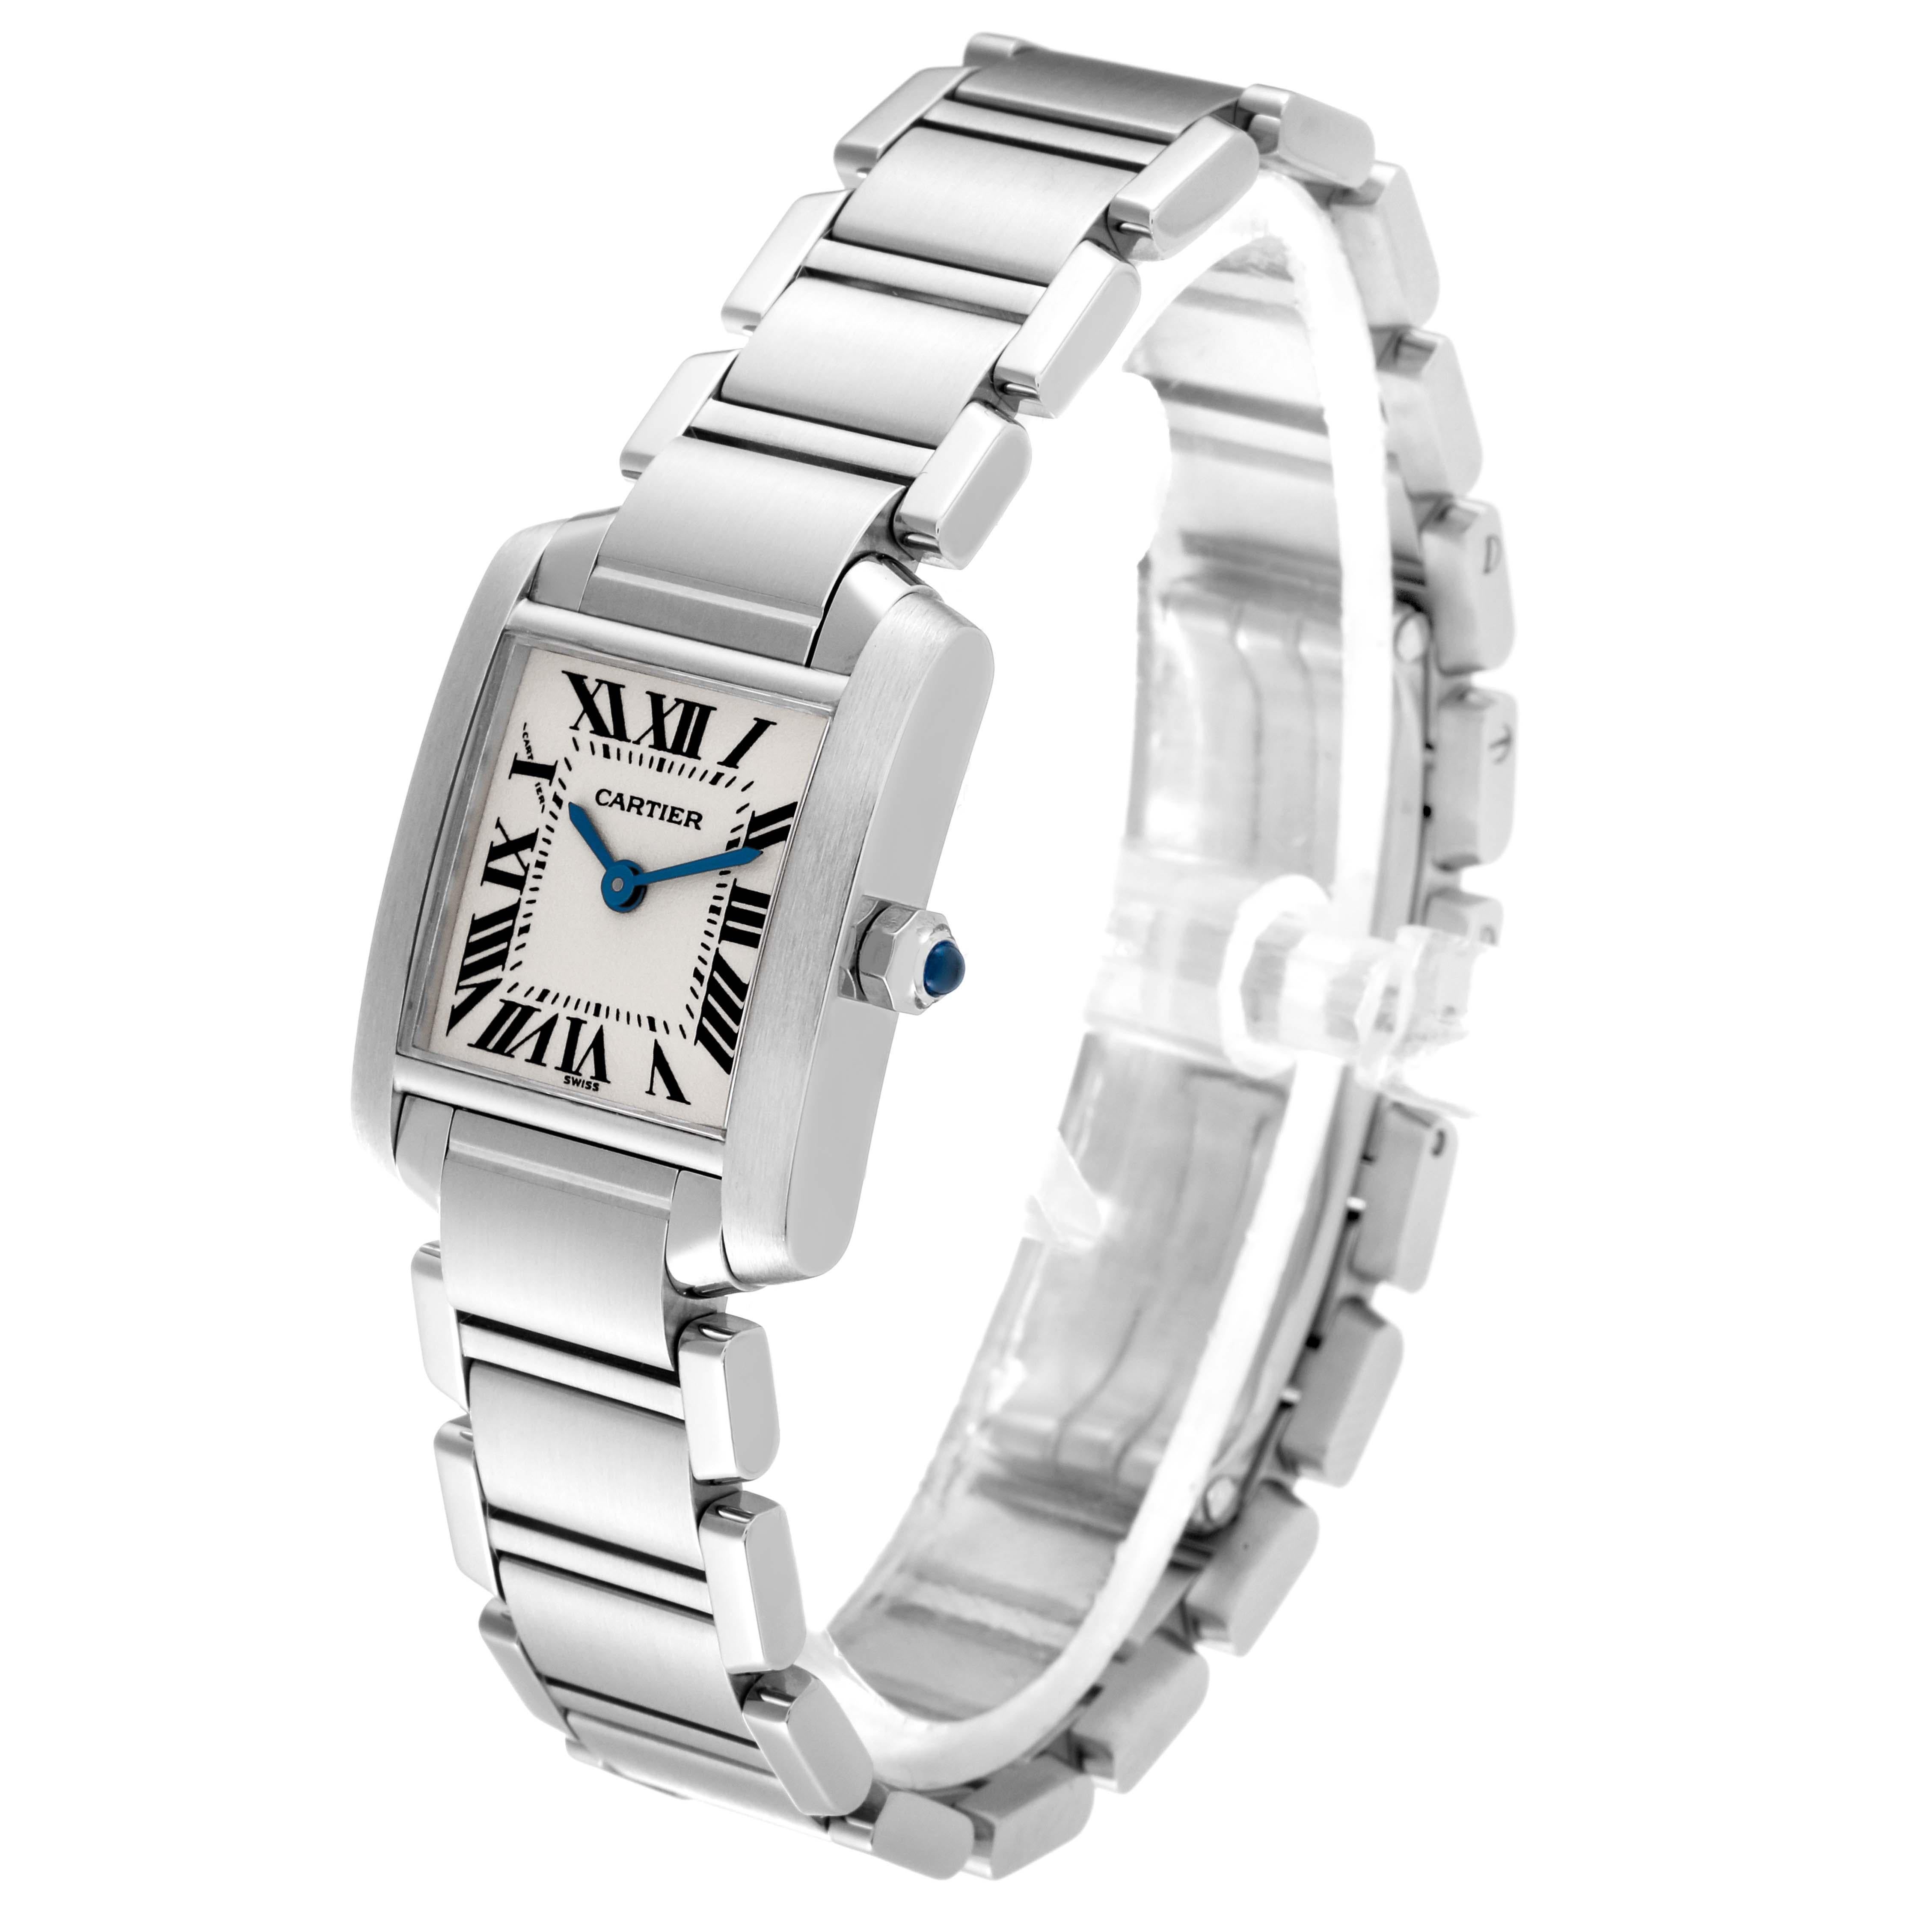 Cartier Tank Francaise Small Silver Dial Steel Ladies Watch W51008Q3 Box Papers In Excellent Condition For Sale In Atlanta, GA